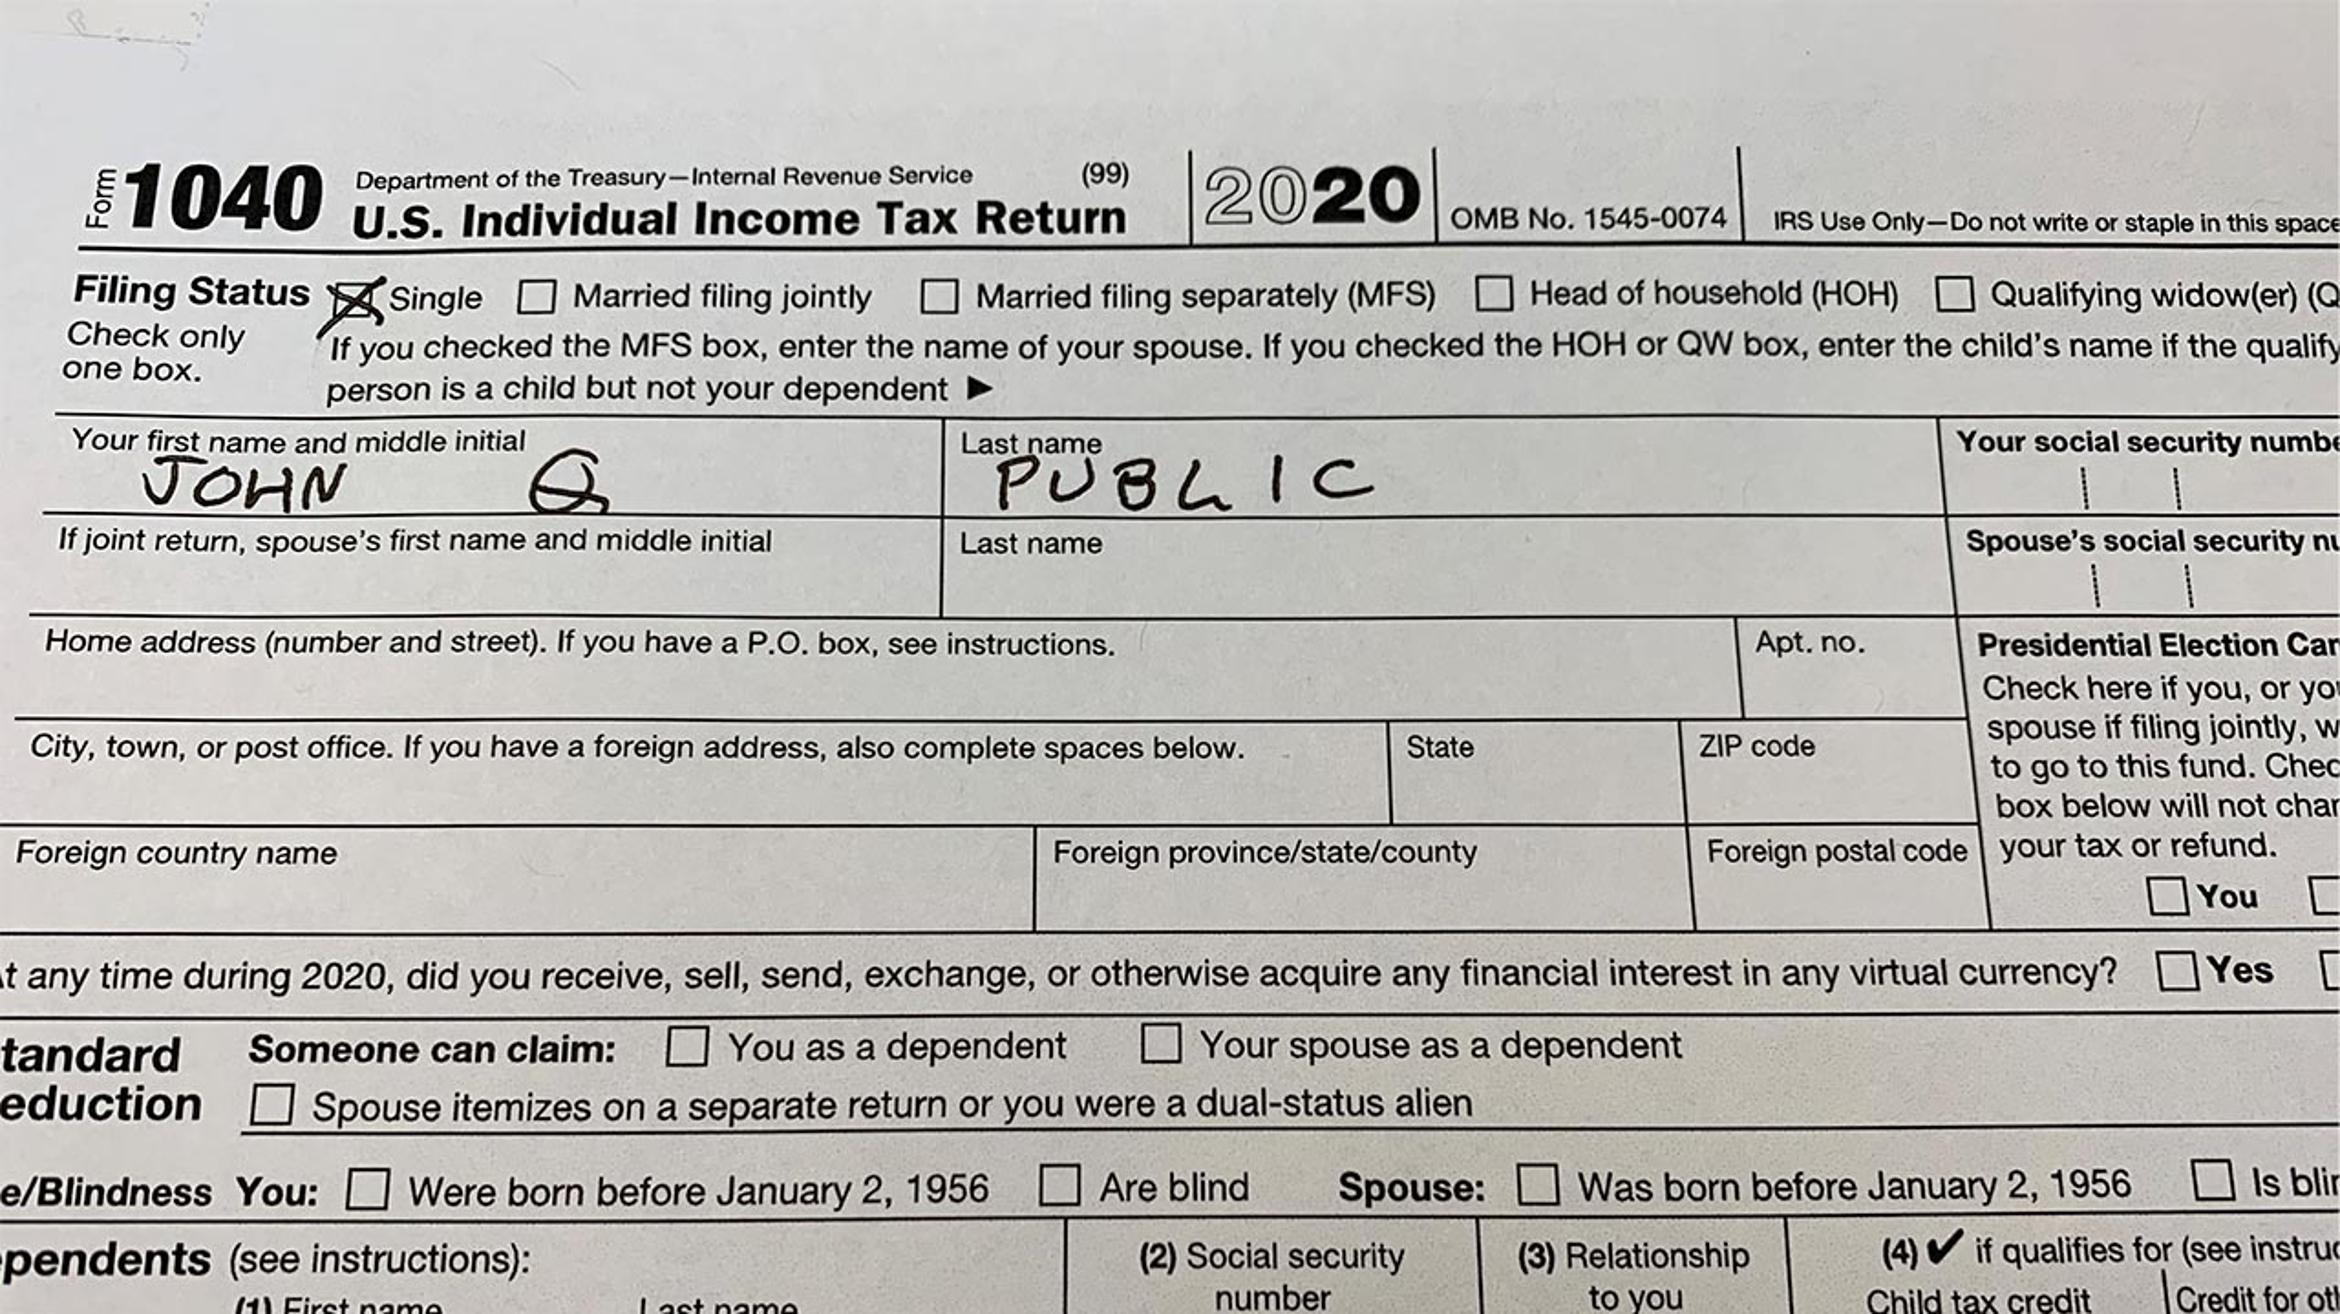 The IRS Begins 2020 Tax Season While Dealing With Lingering